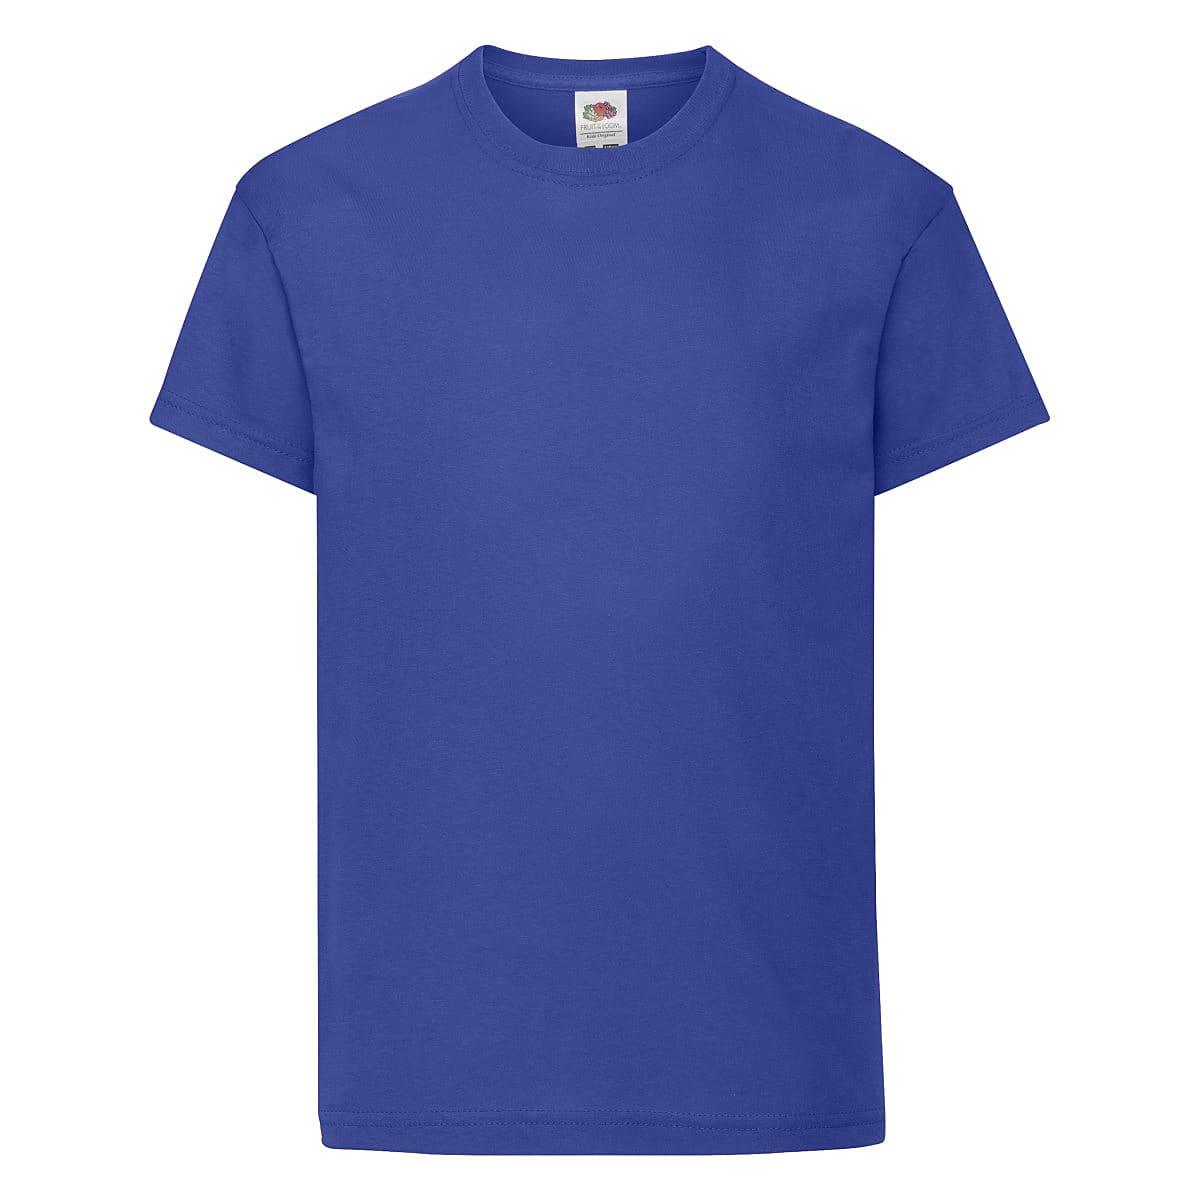 Fruit Of The Loom Kids Original T-Shirt in Royal Blue (Product Code: 61019)